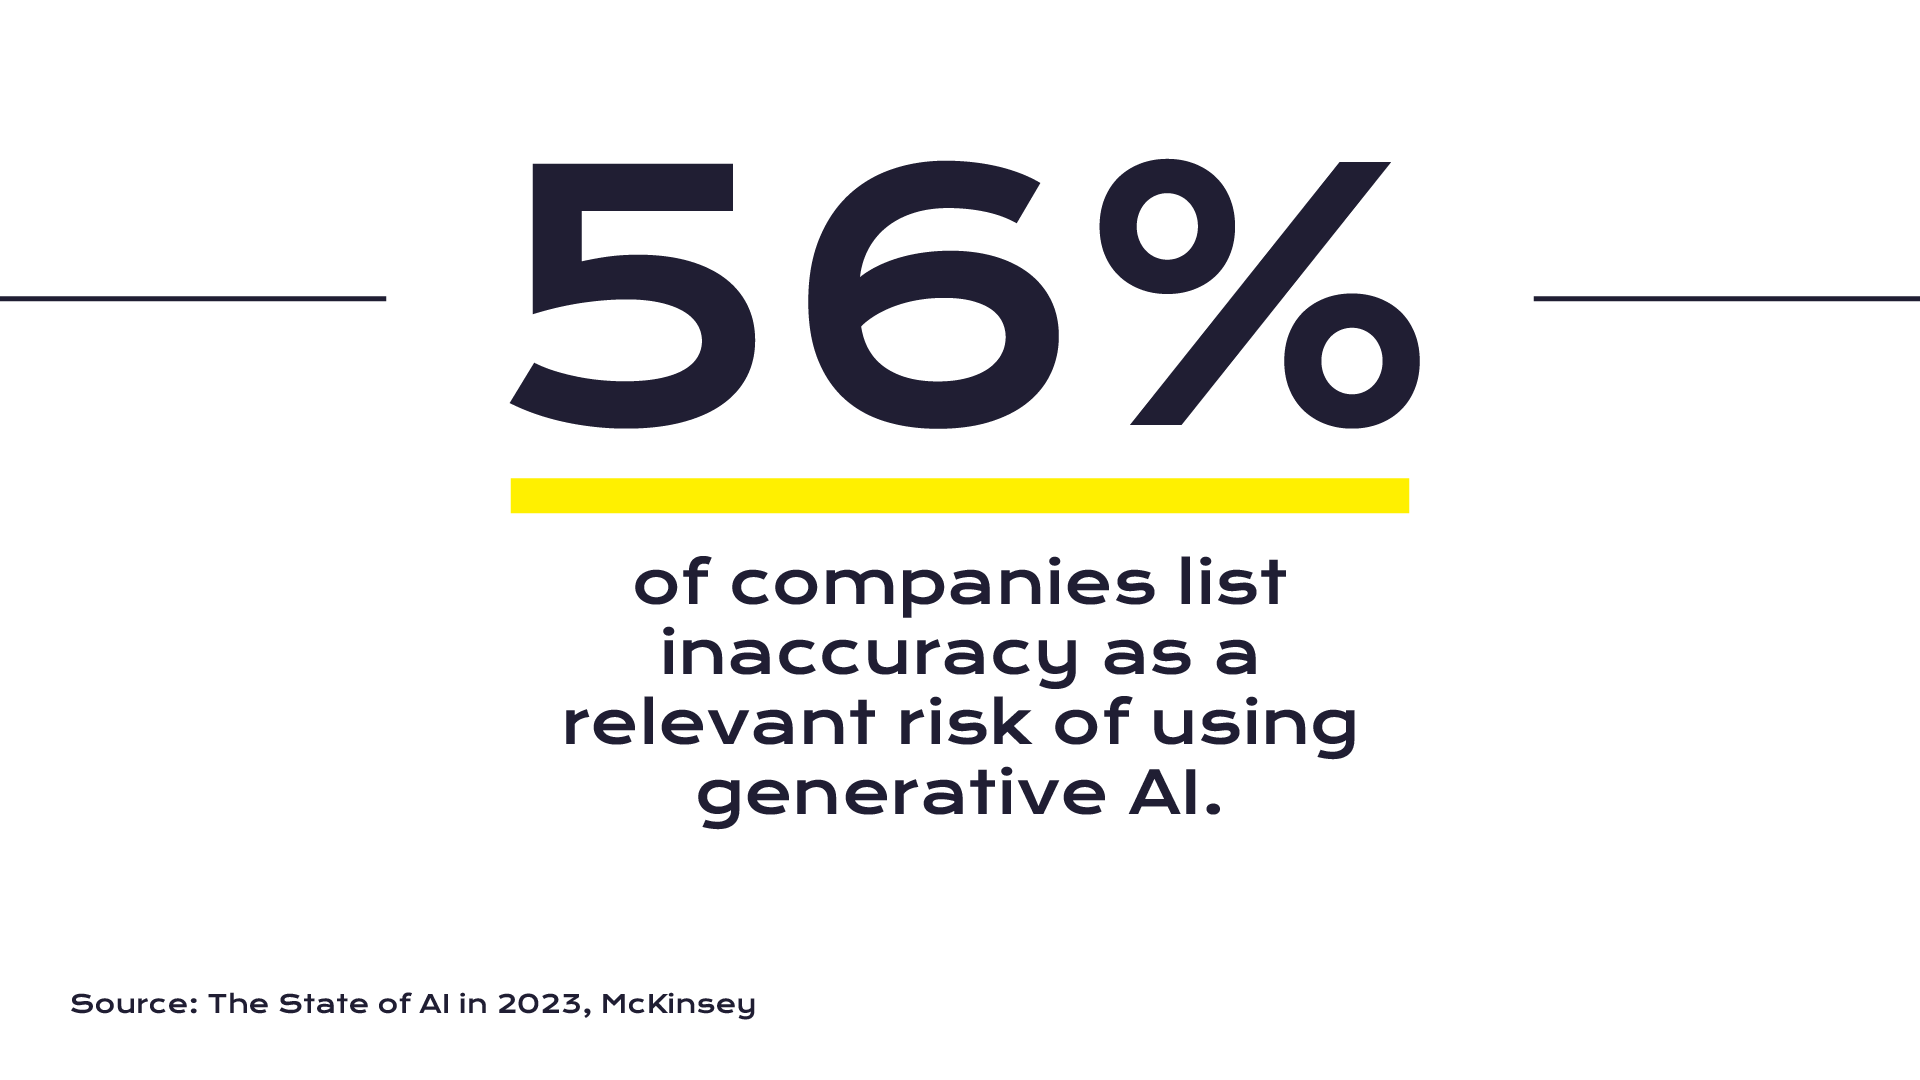 56% of companies list inaccuracy as a relevant risk of using generative AI.